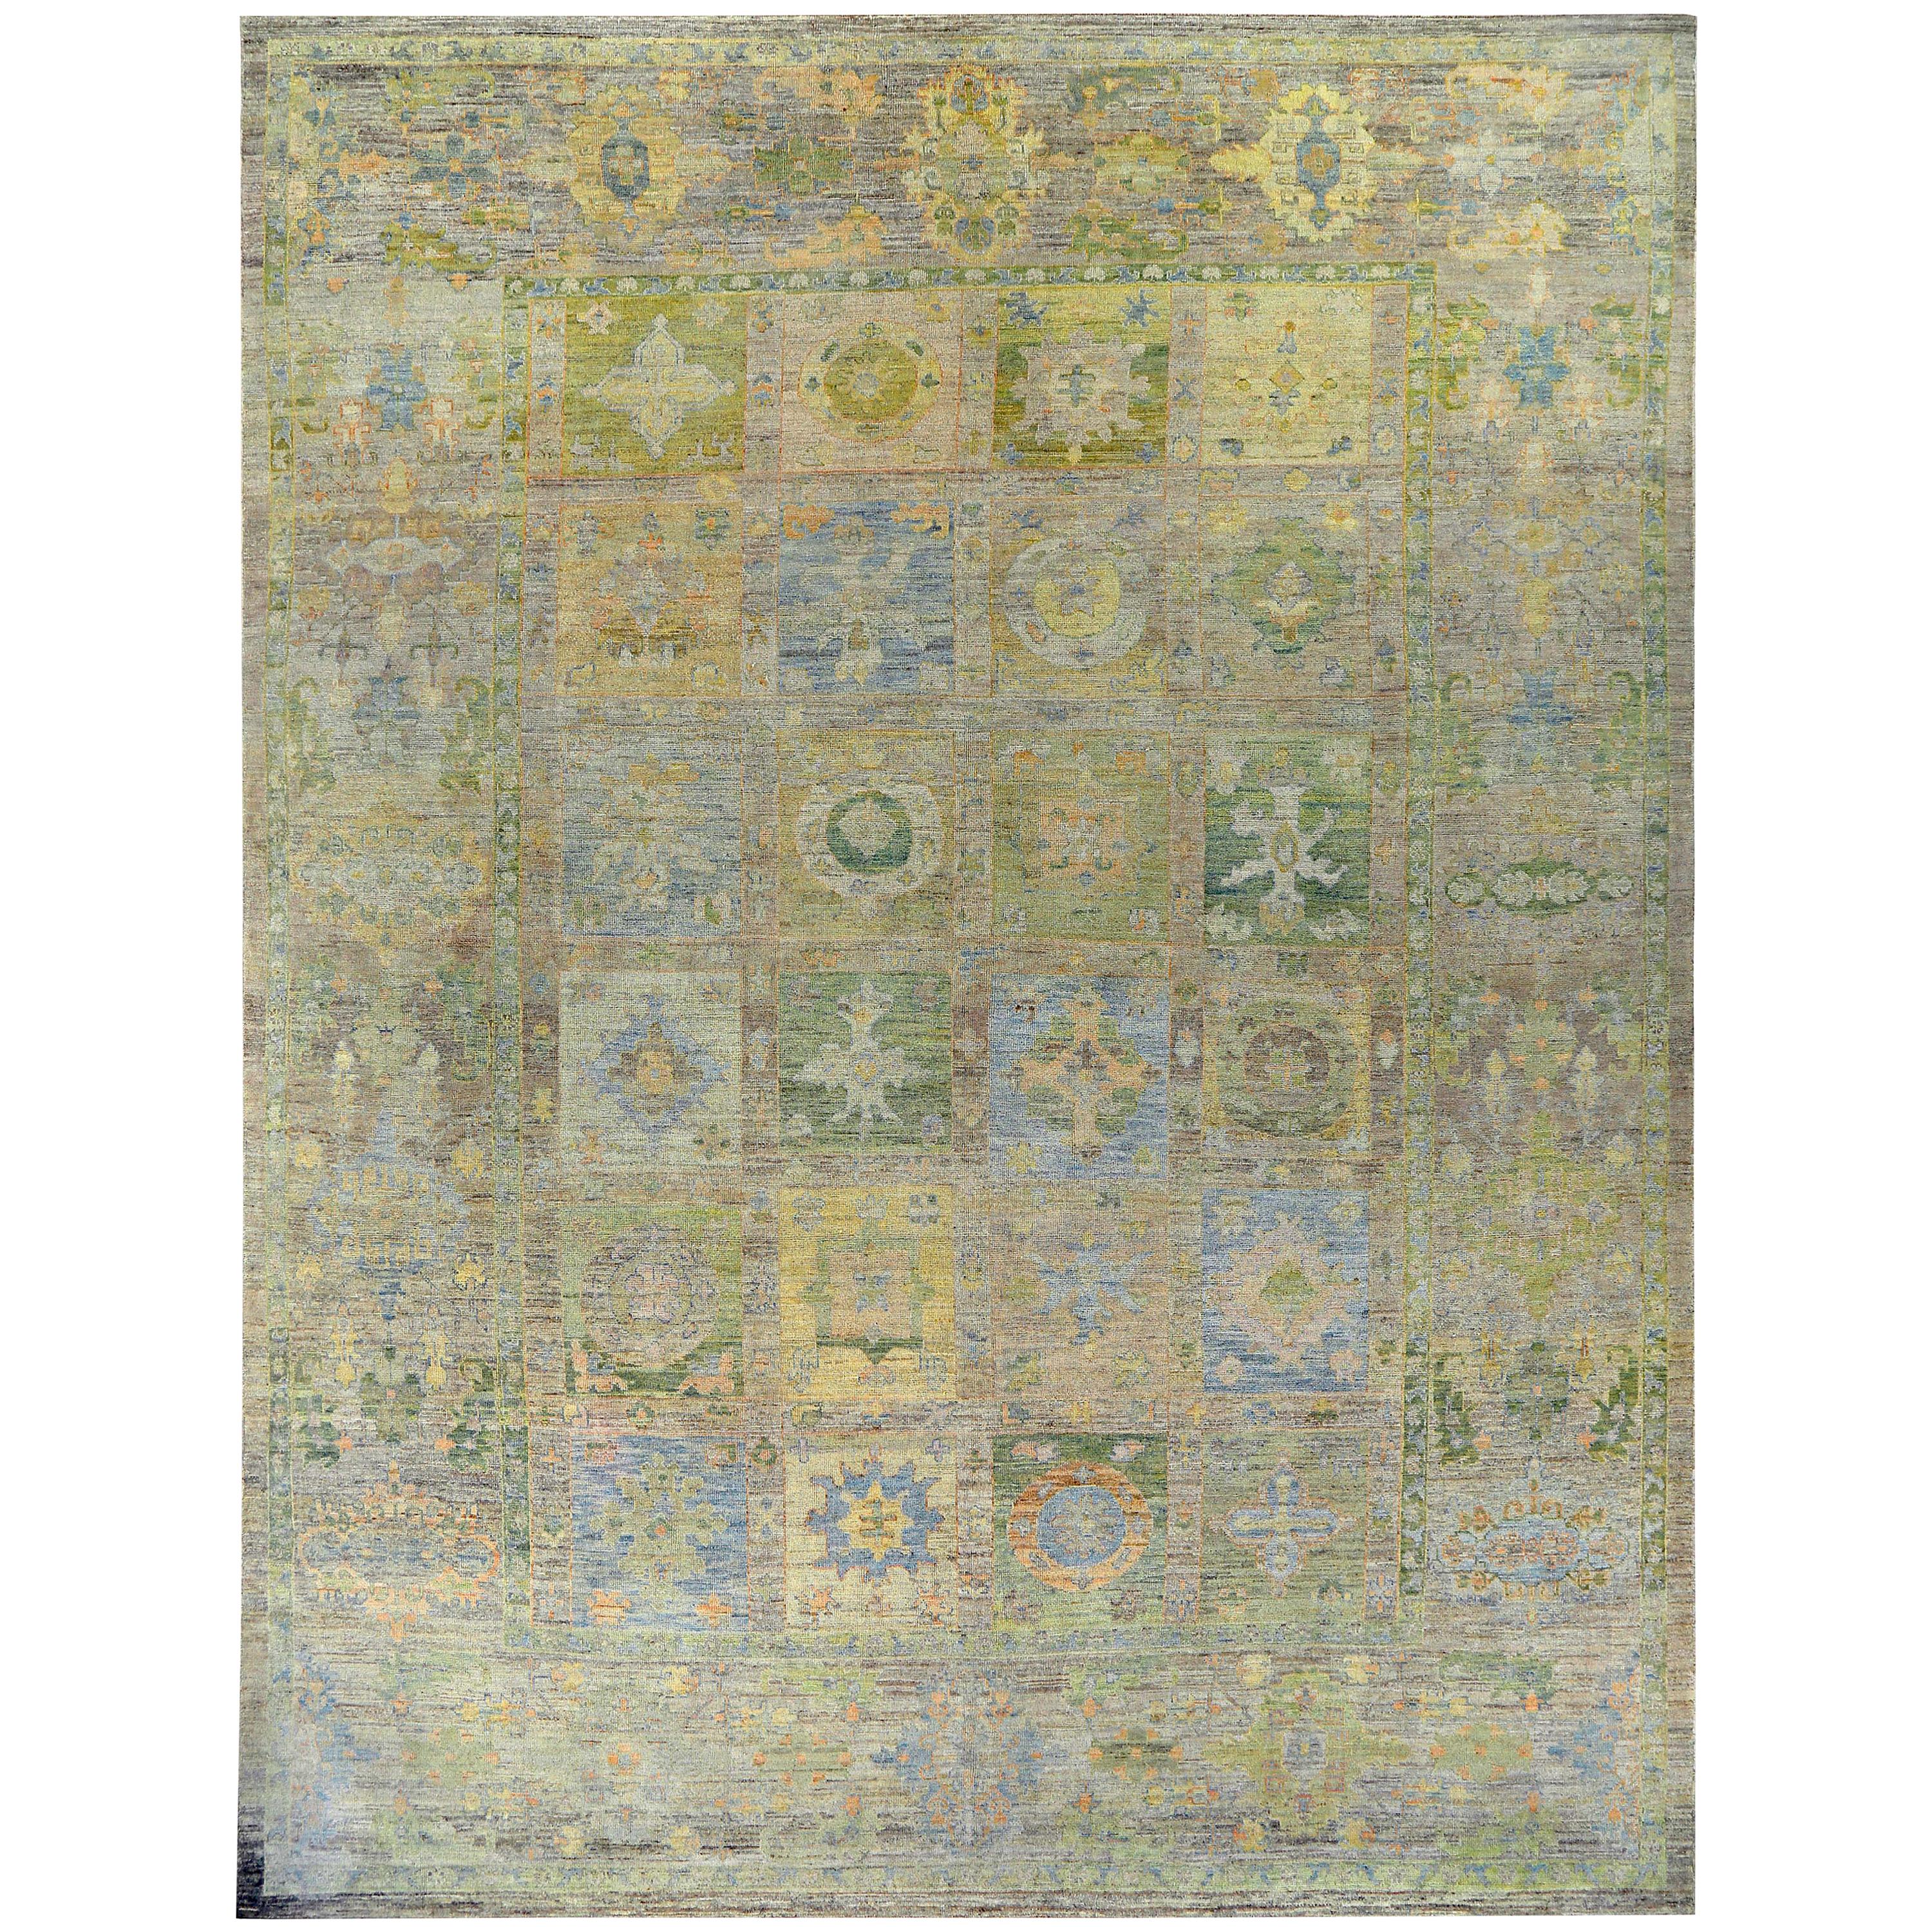 New Turkish Oushak Runner Rug with Blue and Green Floral Blocks on Brown Field For Sale